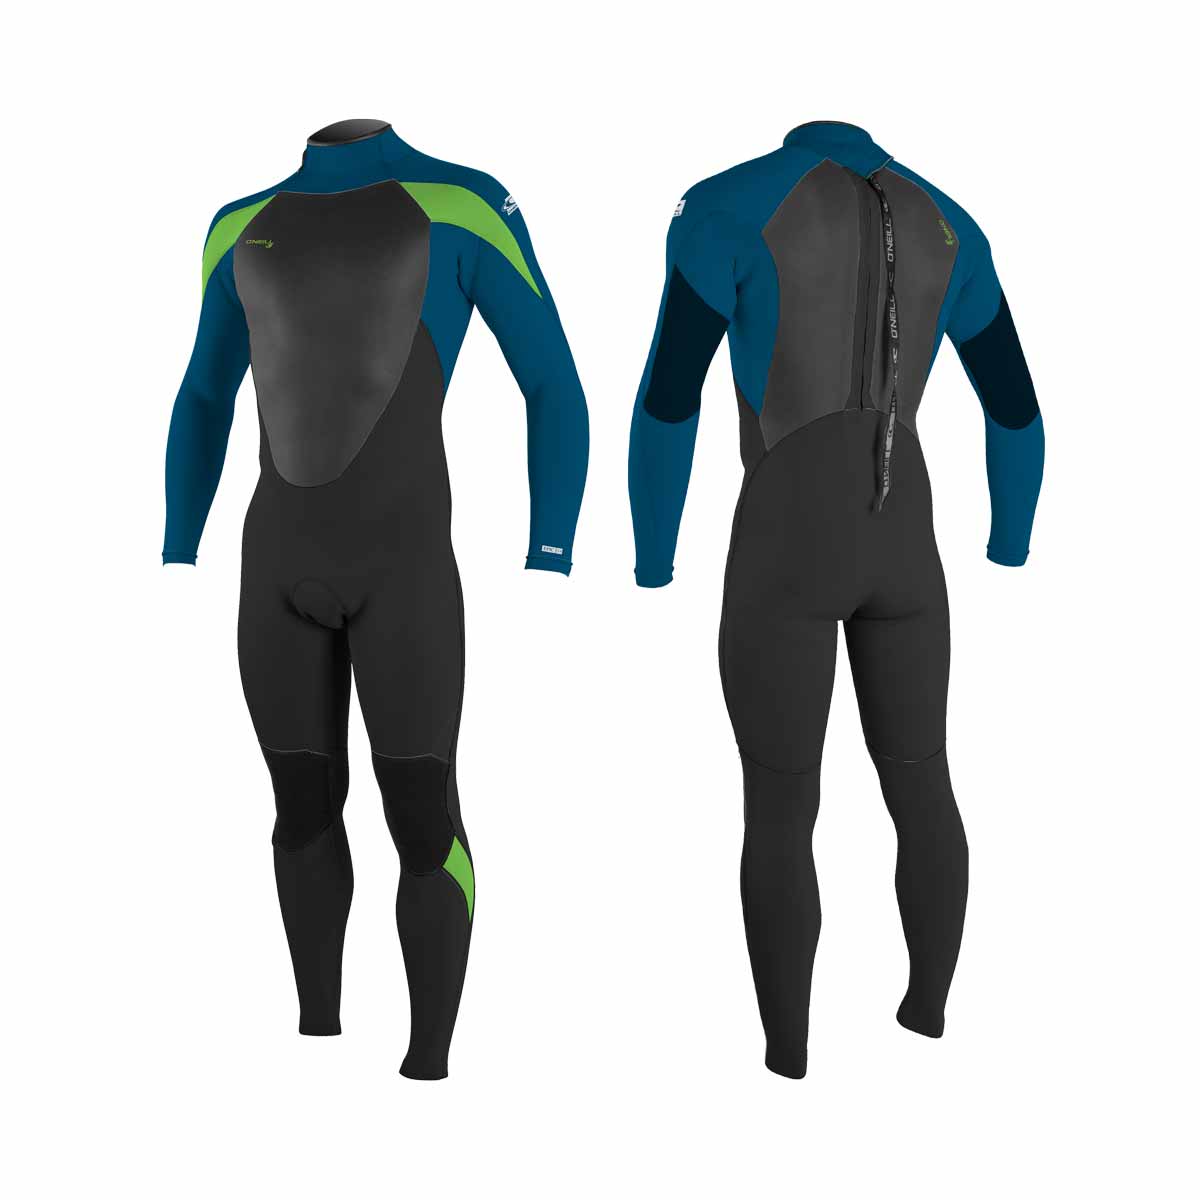 O'Neill Youth Epic full 4/3 mm Wetsuit – Black/Ultrablu/Dayglo GS6